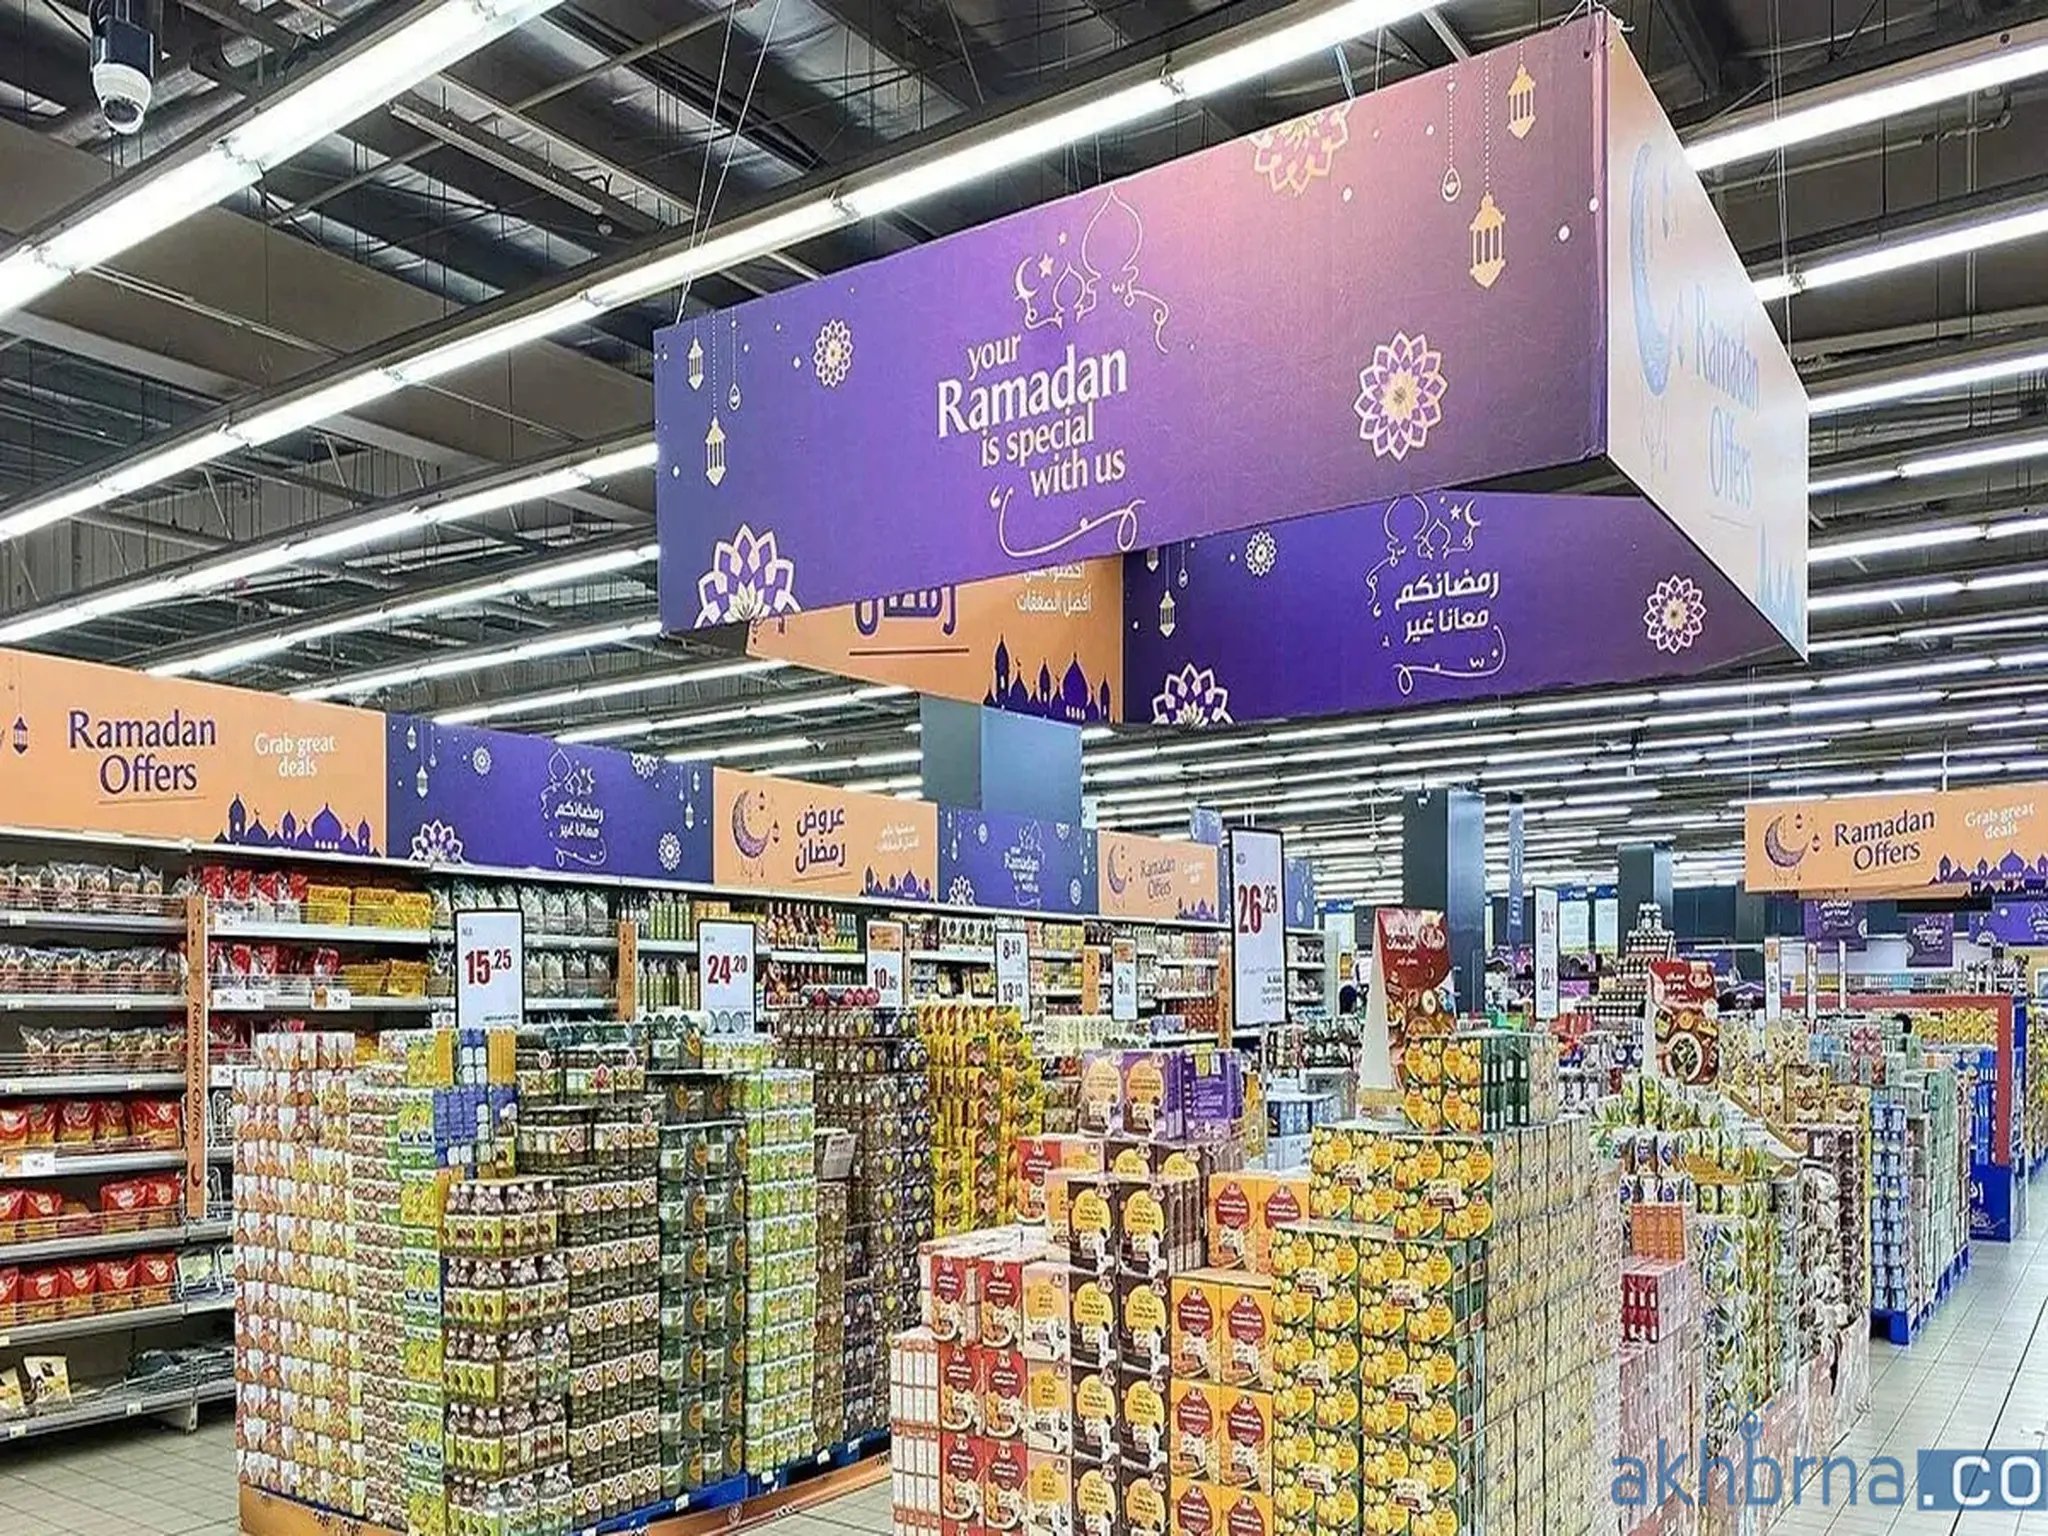 UAE retailers reduce costs ahead of Ramadan by offering up to 80% discounts